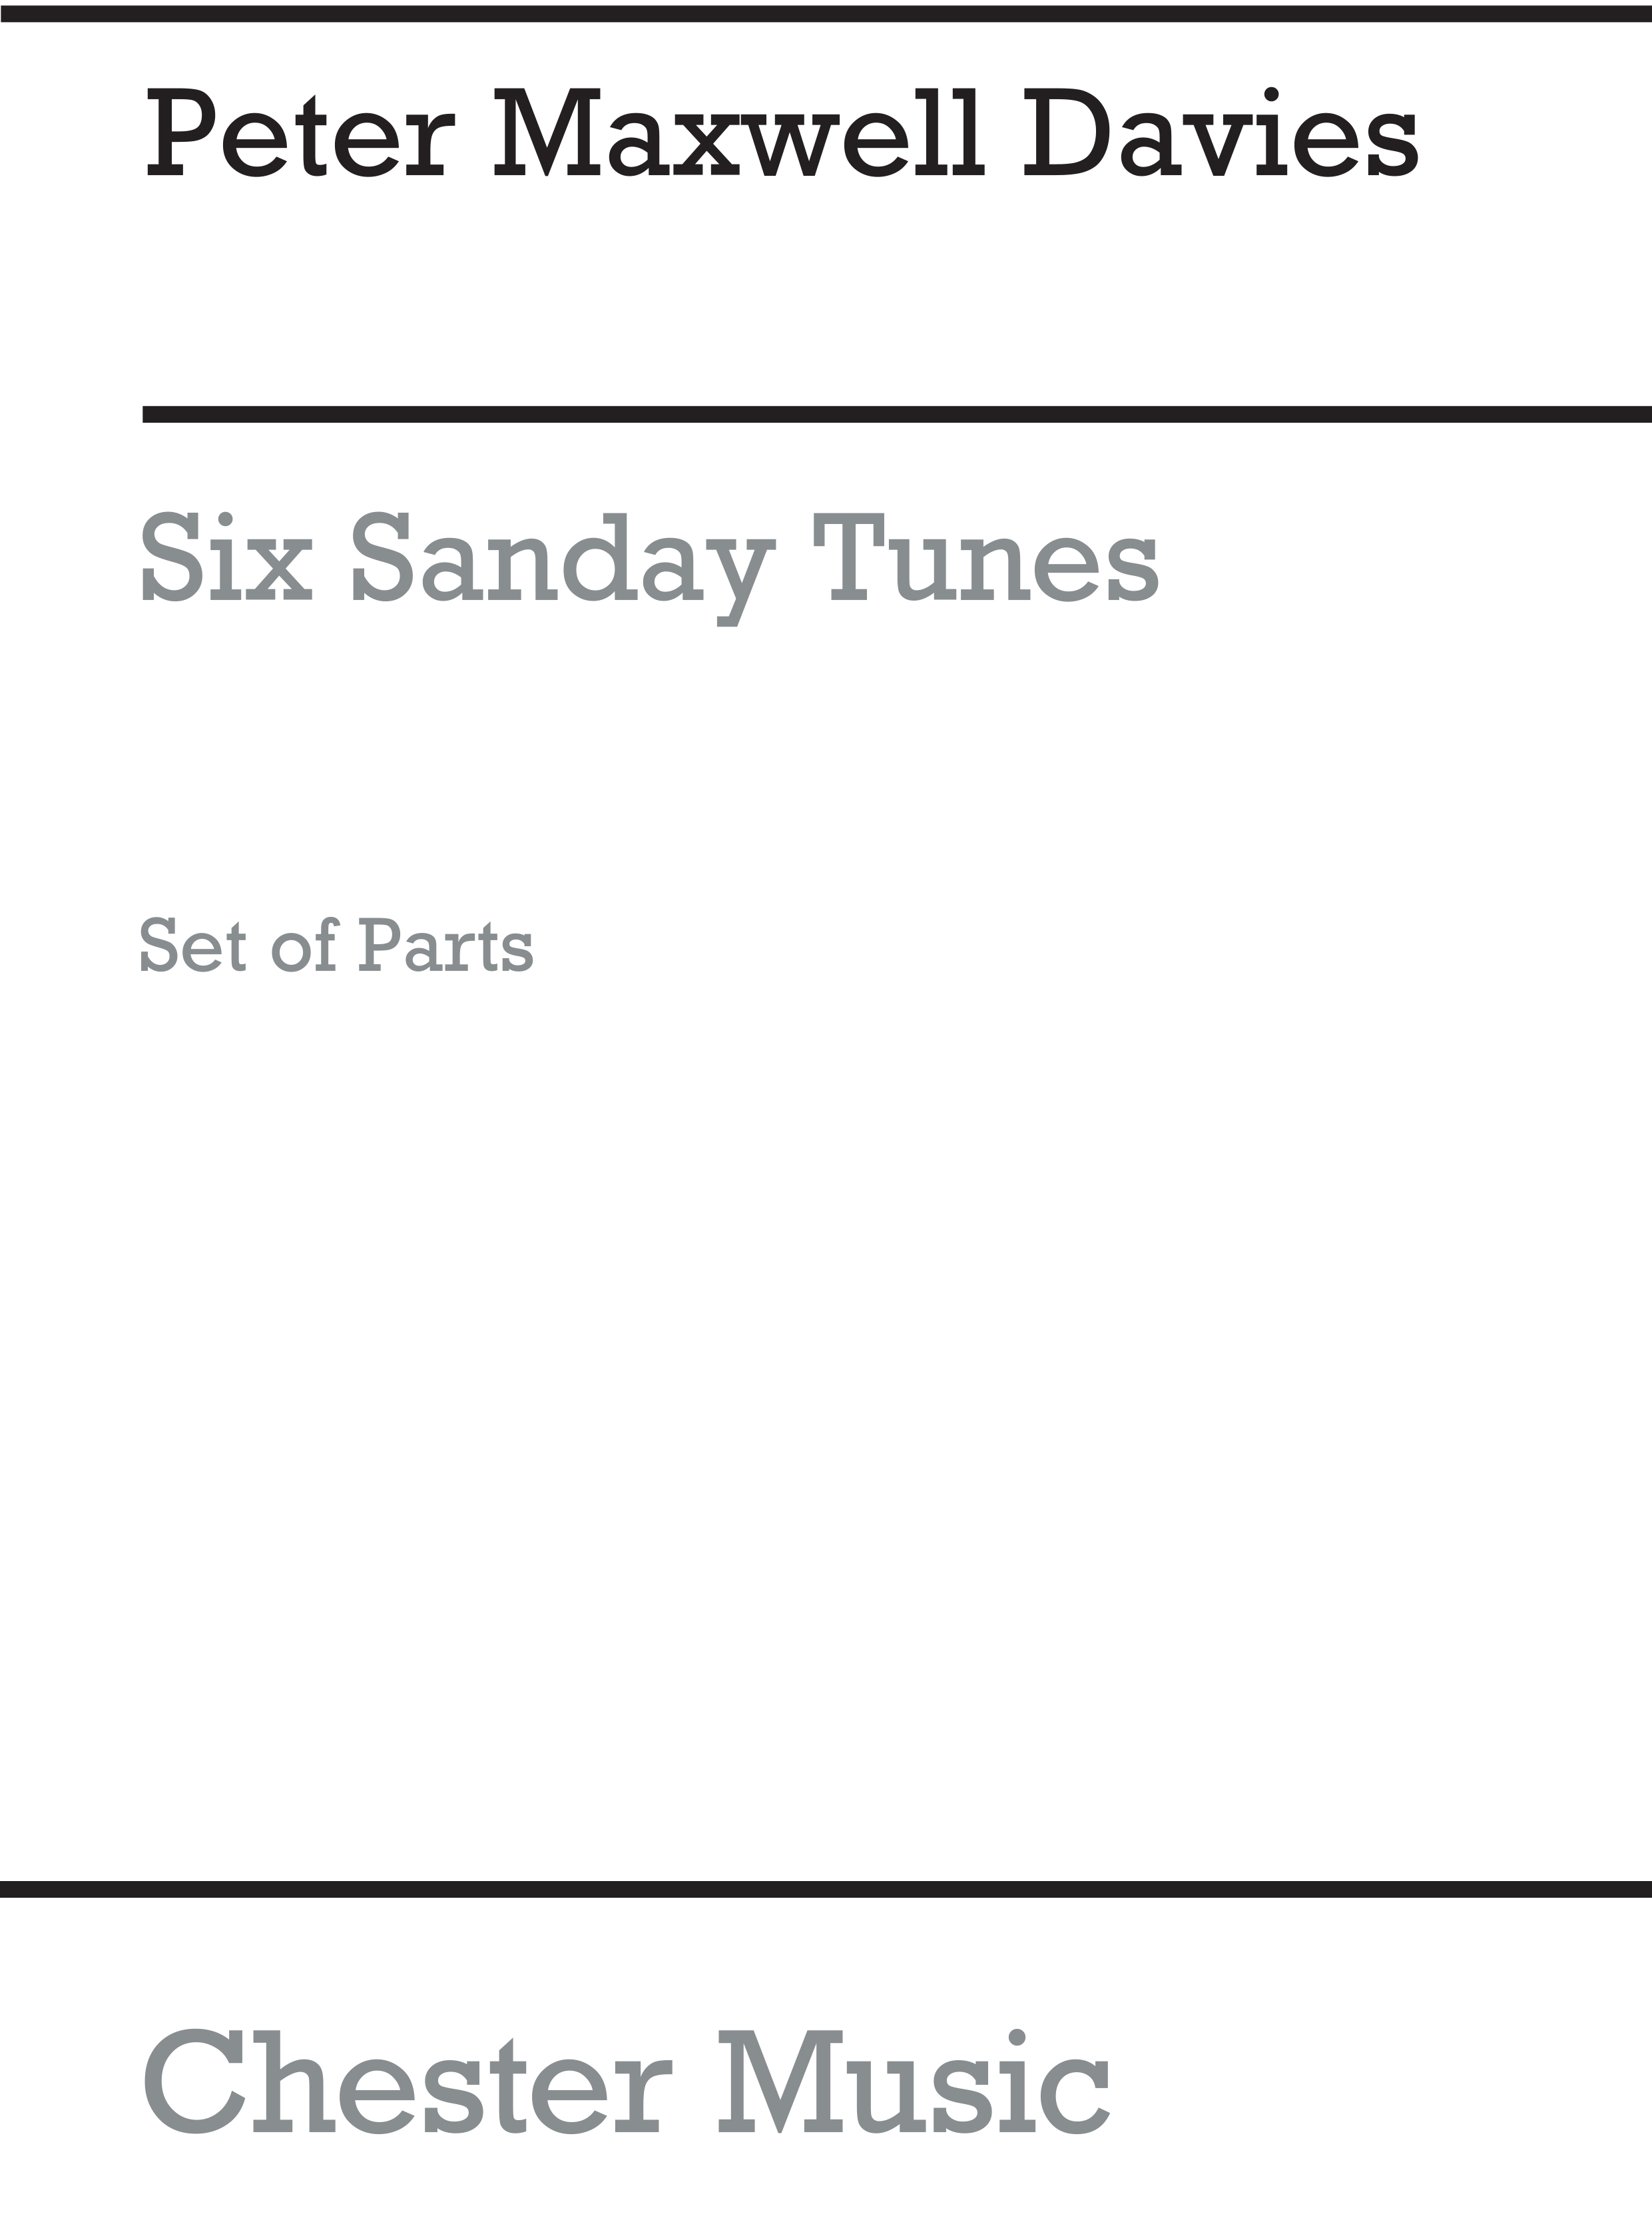 Peter Maxwell Davies: Six Sanday Tunes (Five String Parts): Parts